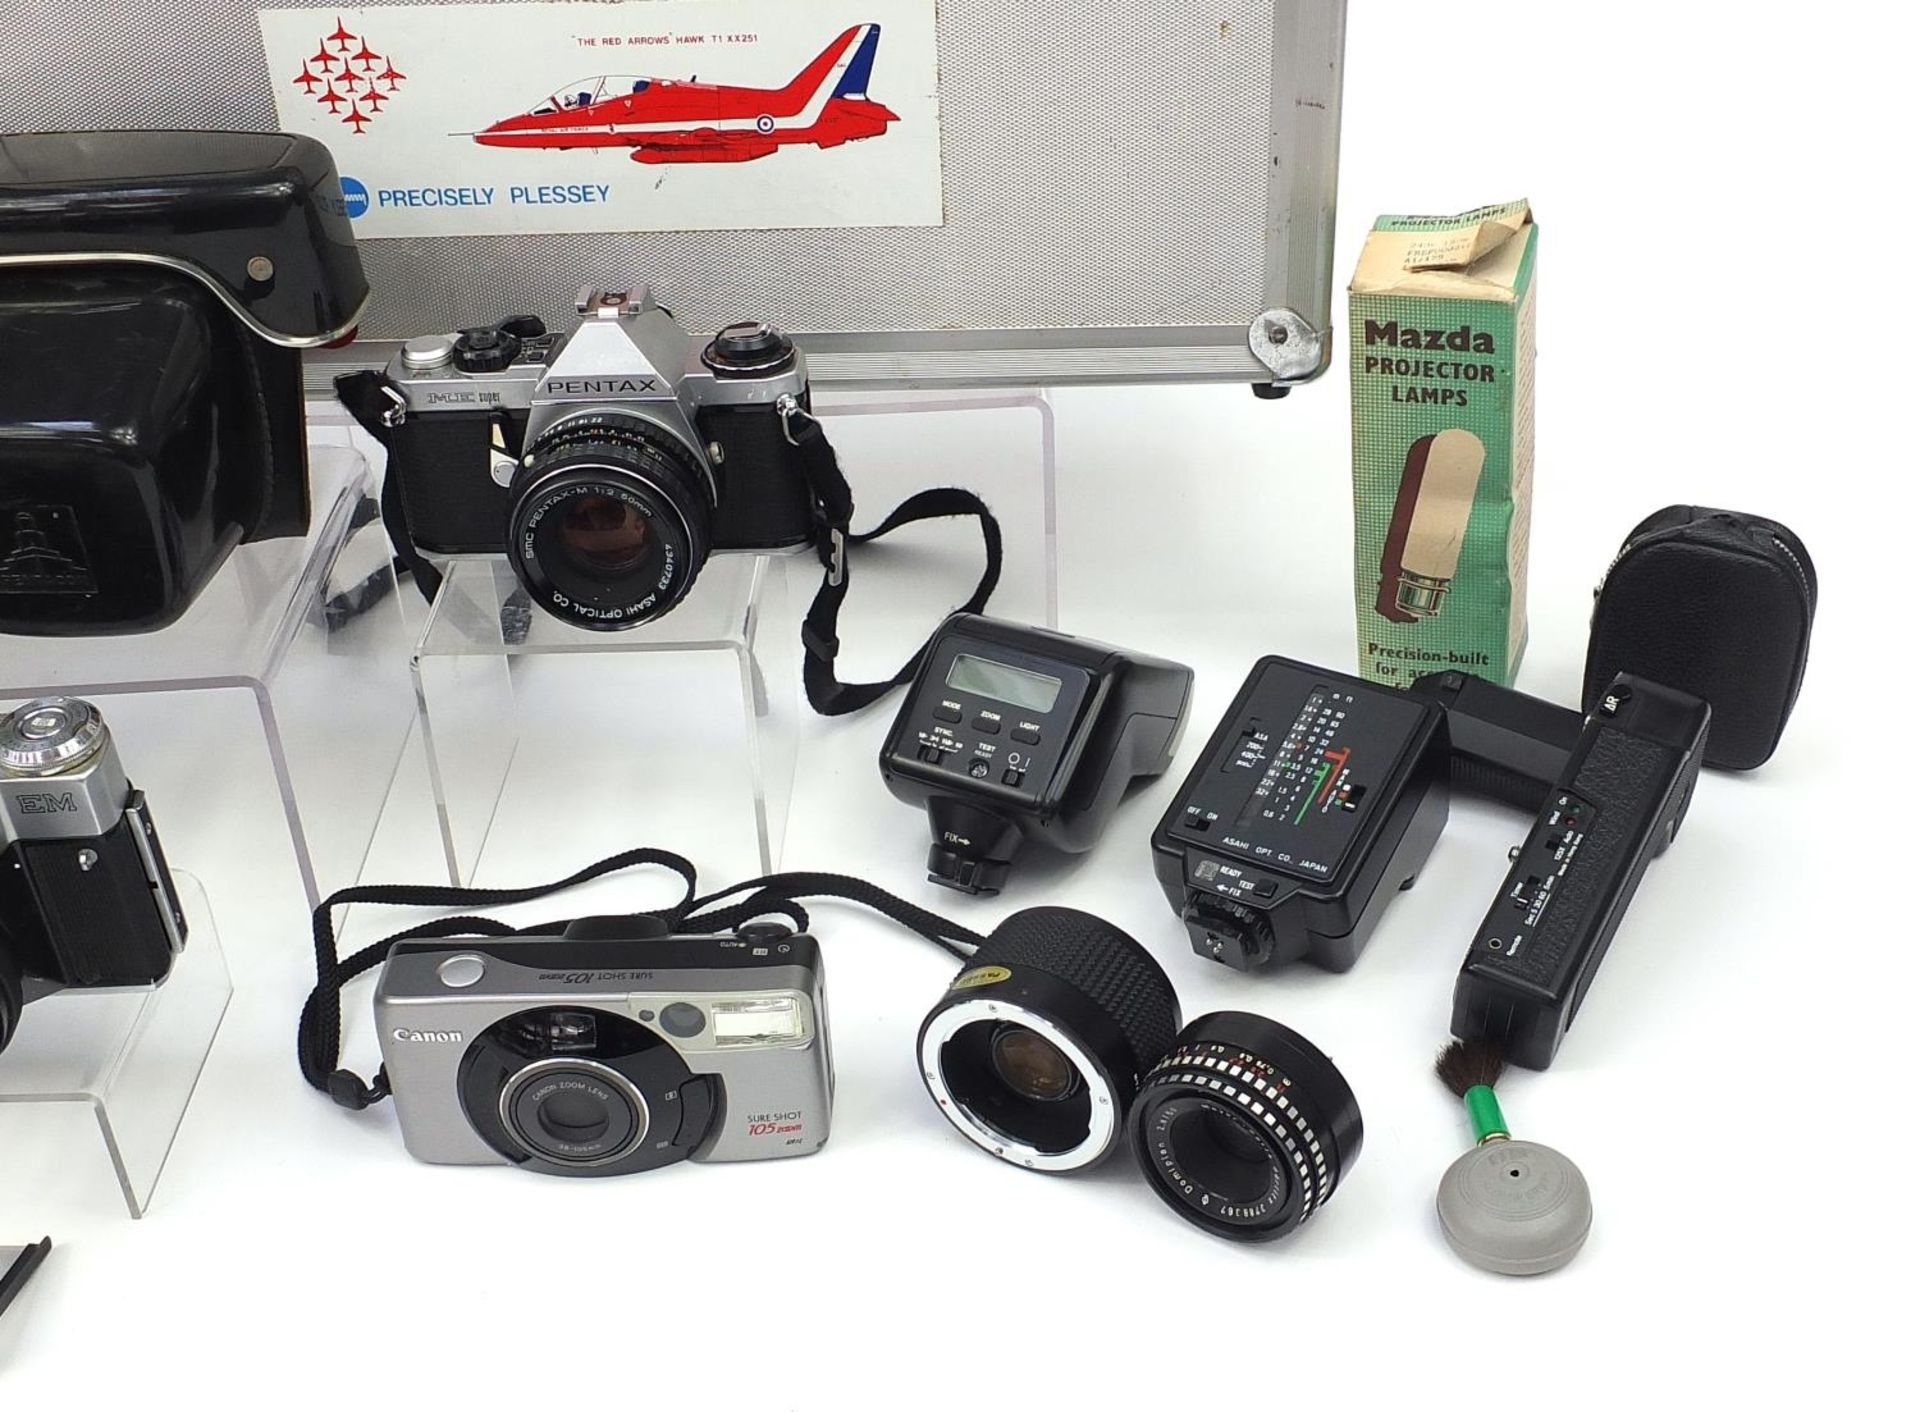 Vintage and later cameras, lenses and accesories including Zenith, Pentax, Canon, converters, - Image 4 of 5